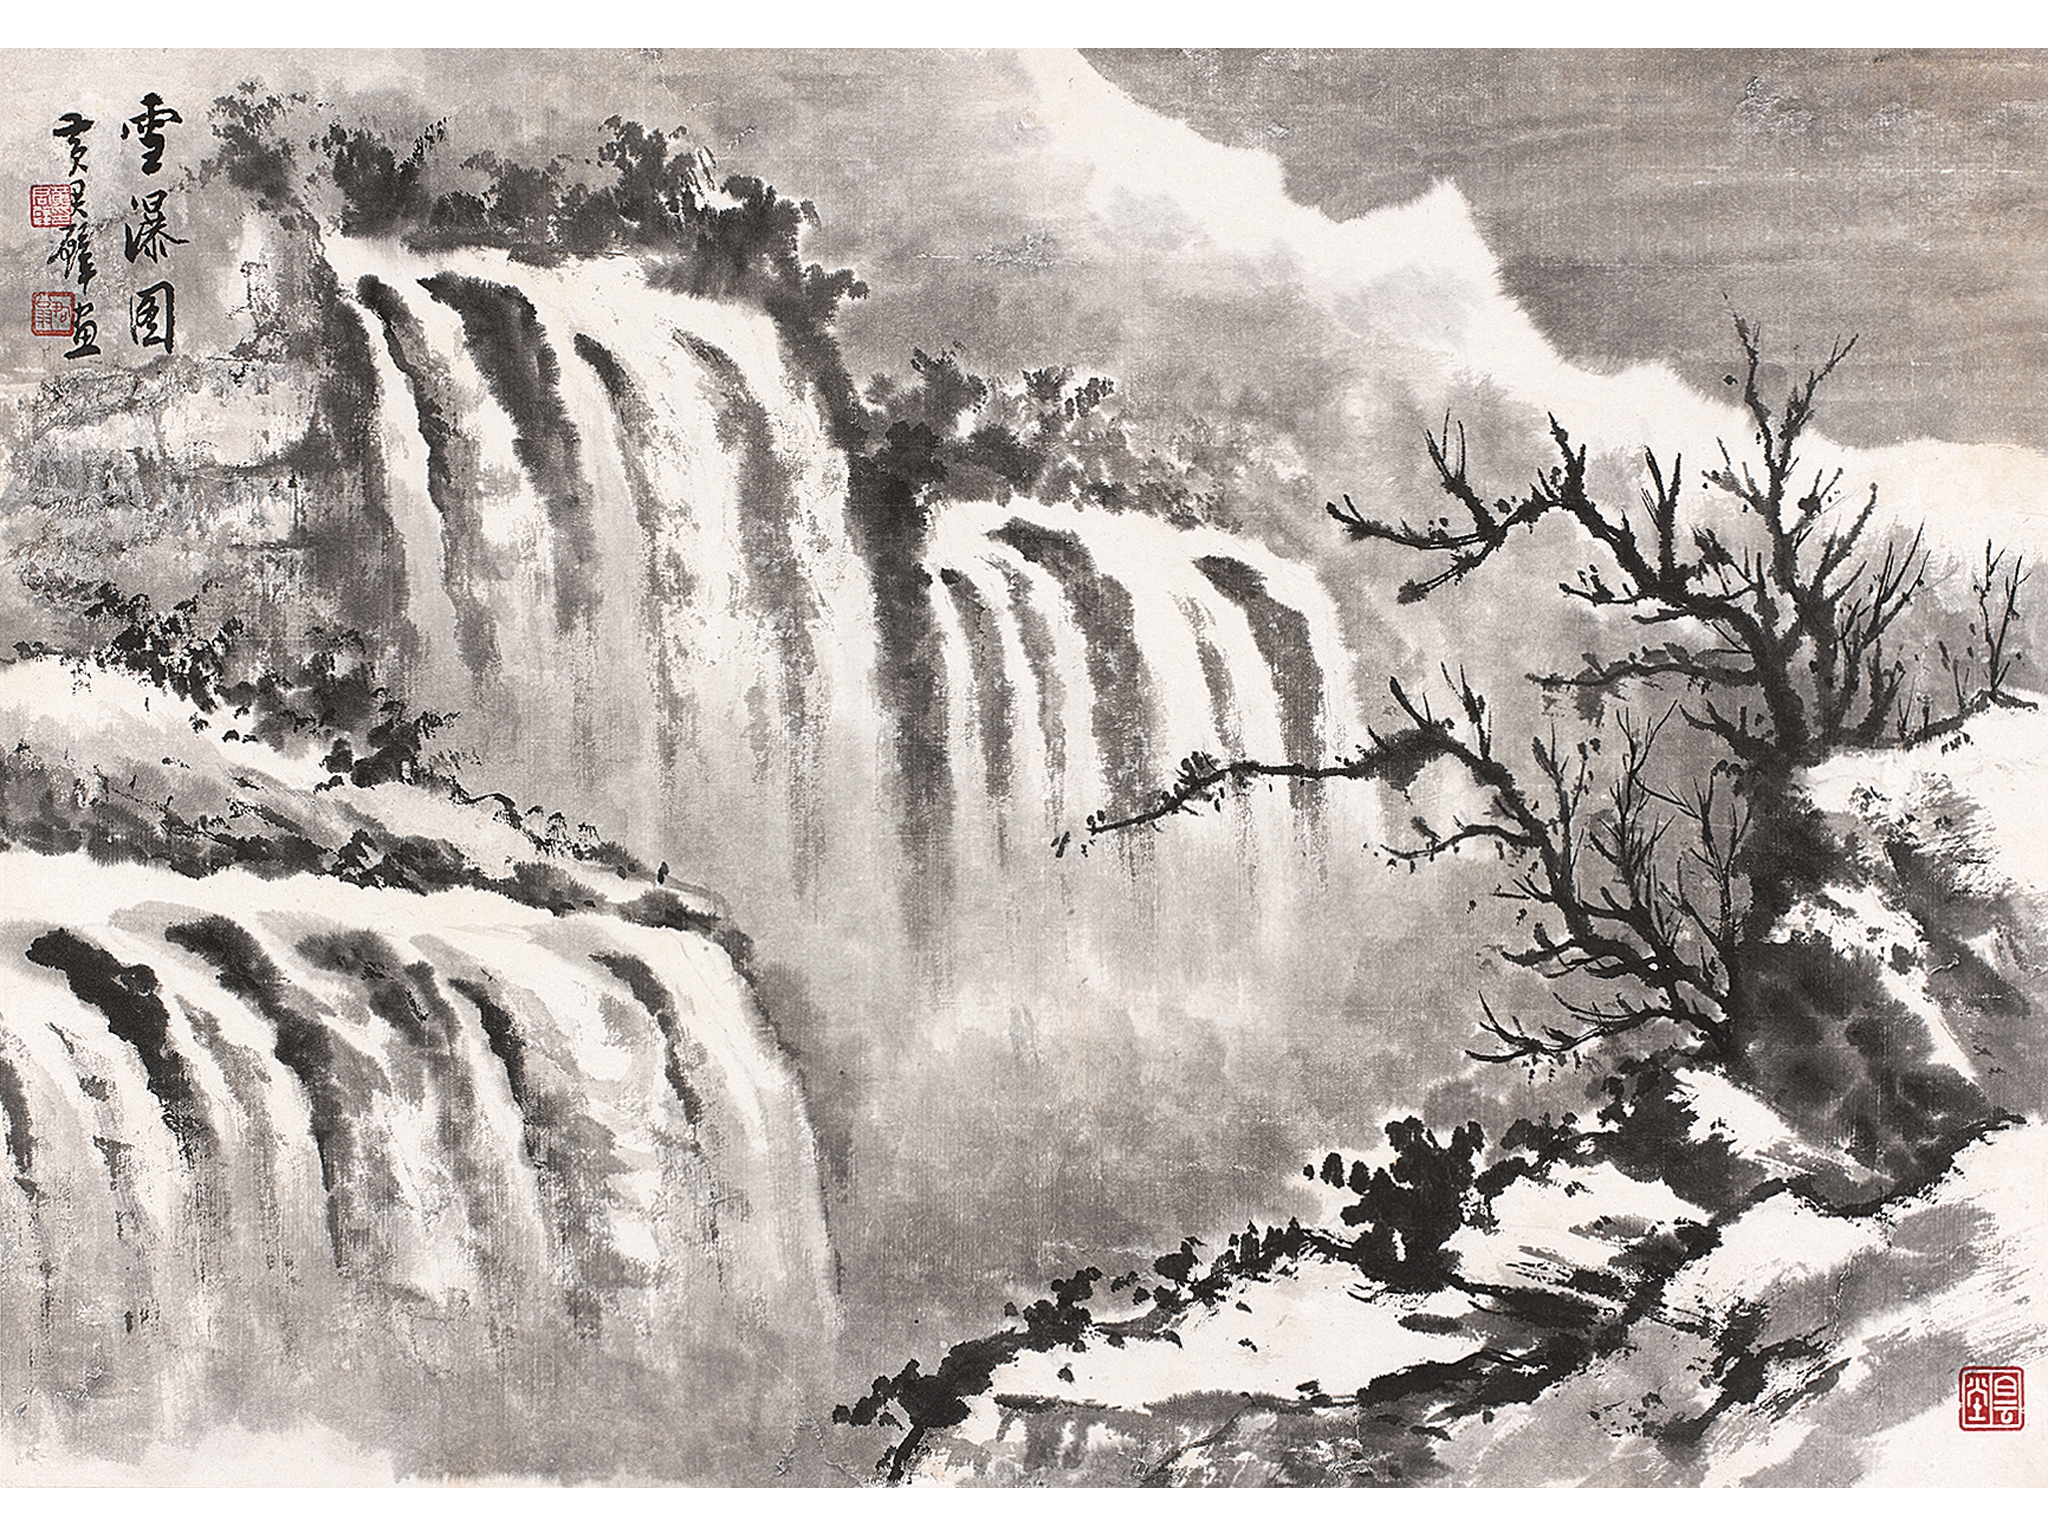 Waterfall and snow mountain by Huang Junbi